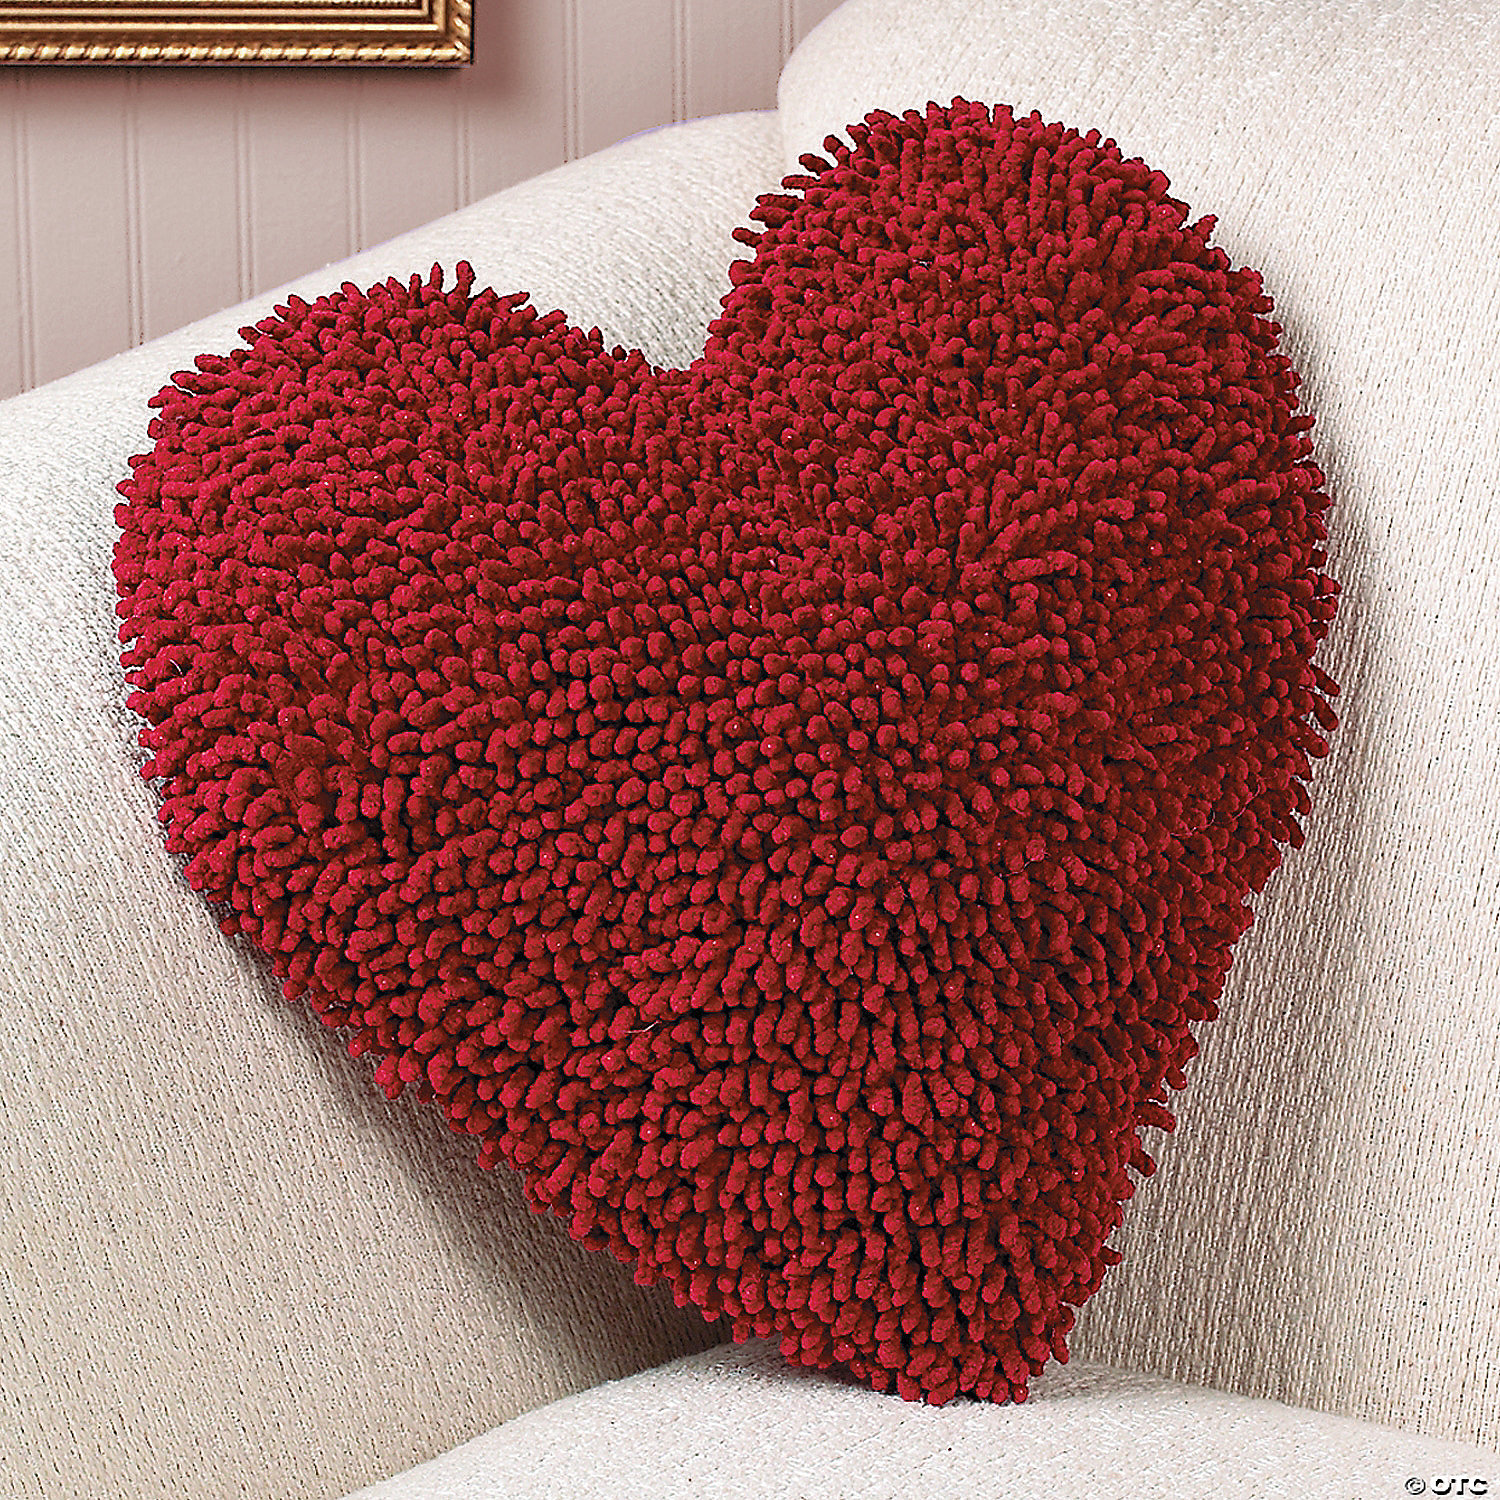 Valentines Heart Pillow 19"x24" Red NWT Chenille Fabric Oversized New Love